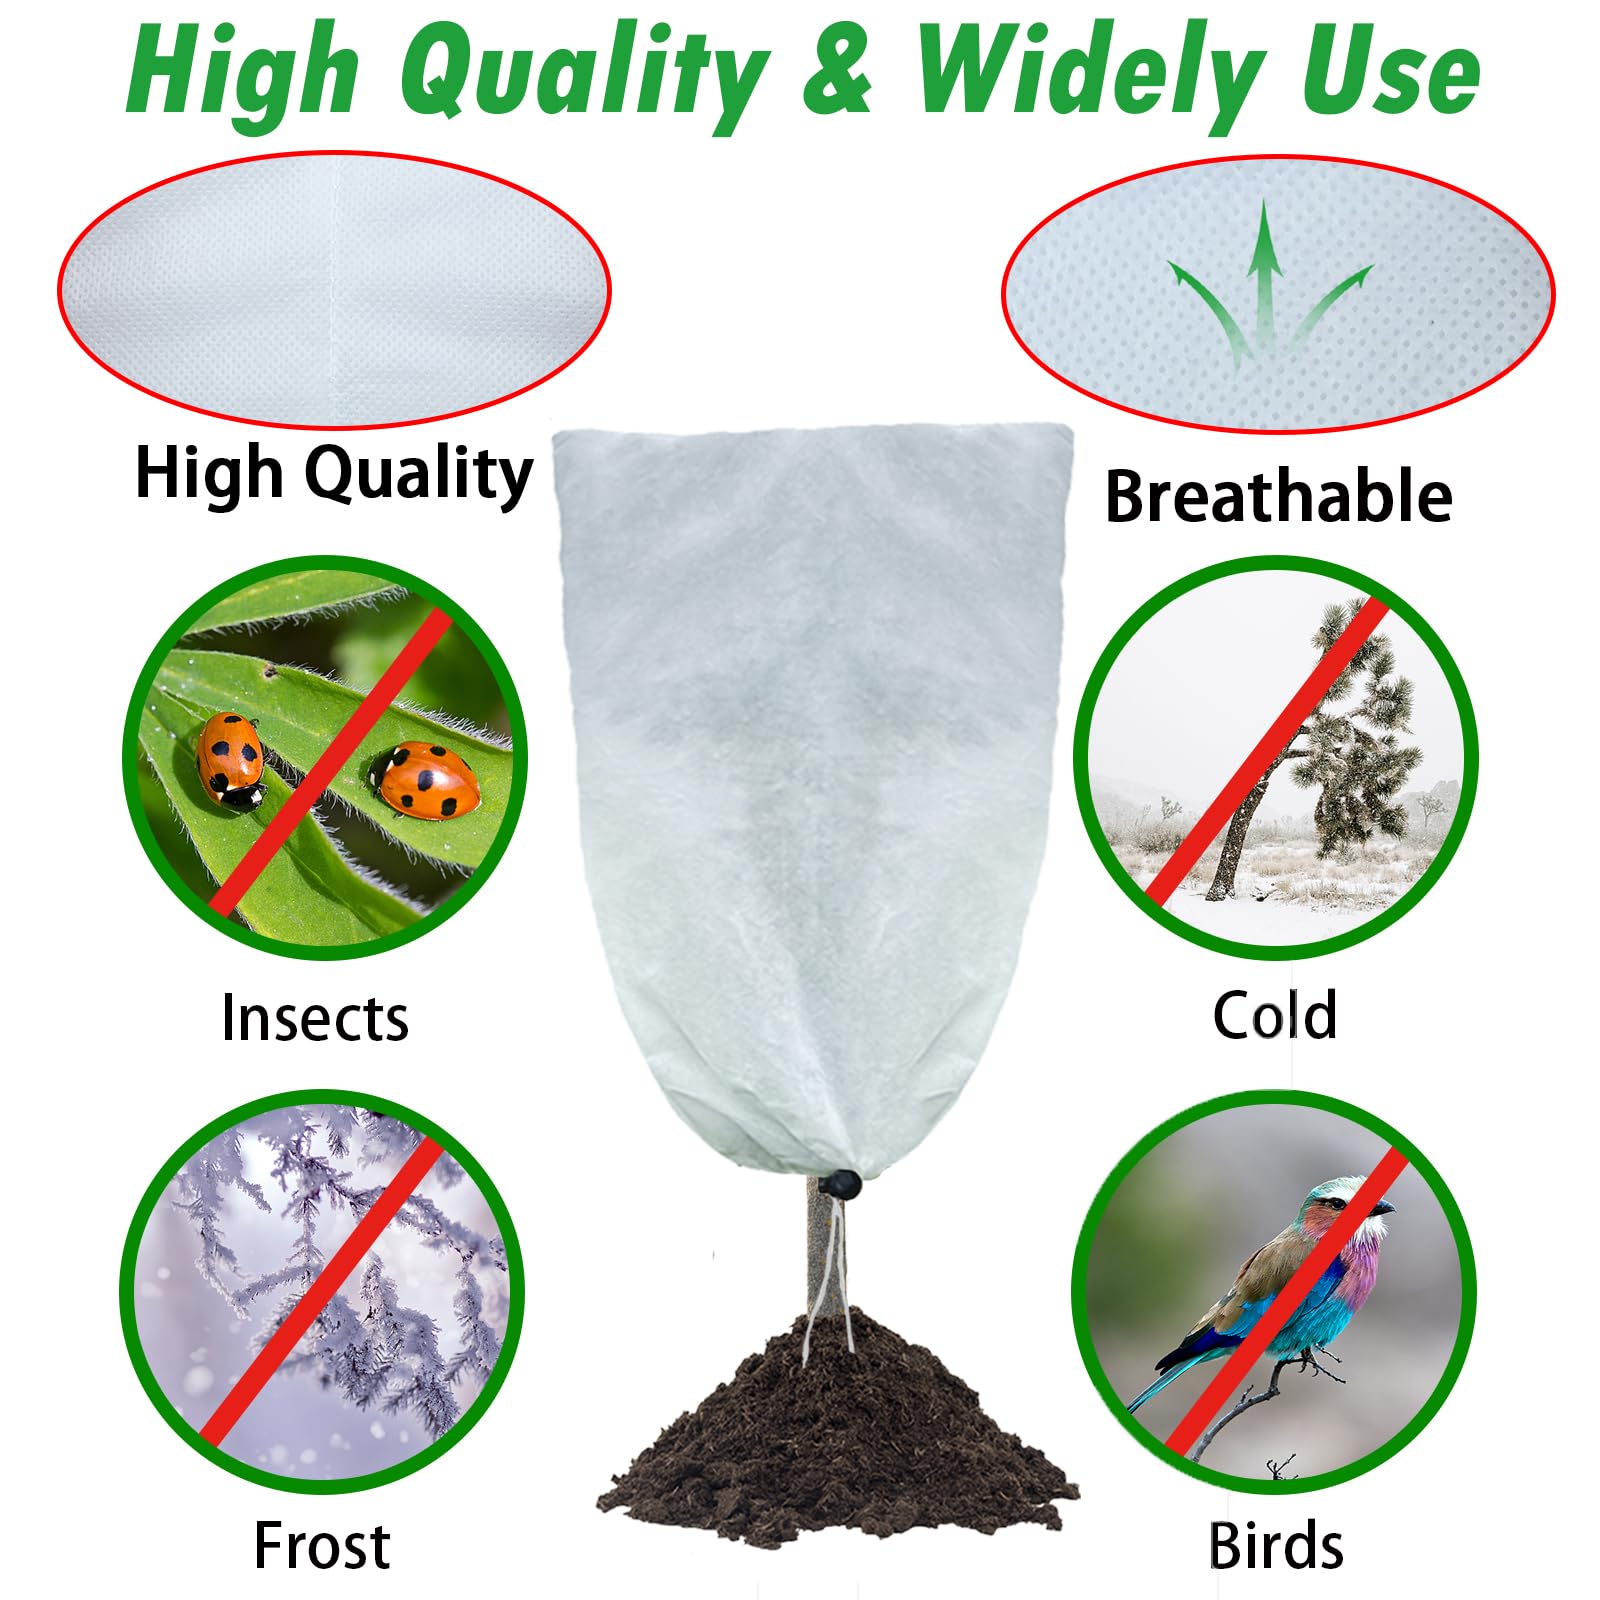 HZxoAxo 5 Packs Upgraded Plant Covers Freeze Protection - 48 x 32IN 2.47 oz/yd²,Reusable Plant Covers Winter with Drawstring,Tree Jacket Blanket for Cold Frost Freeze Bird Insect Prevention